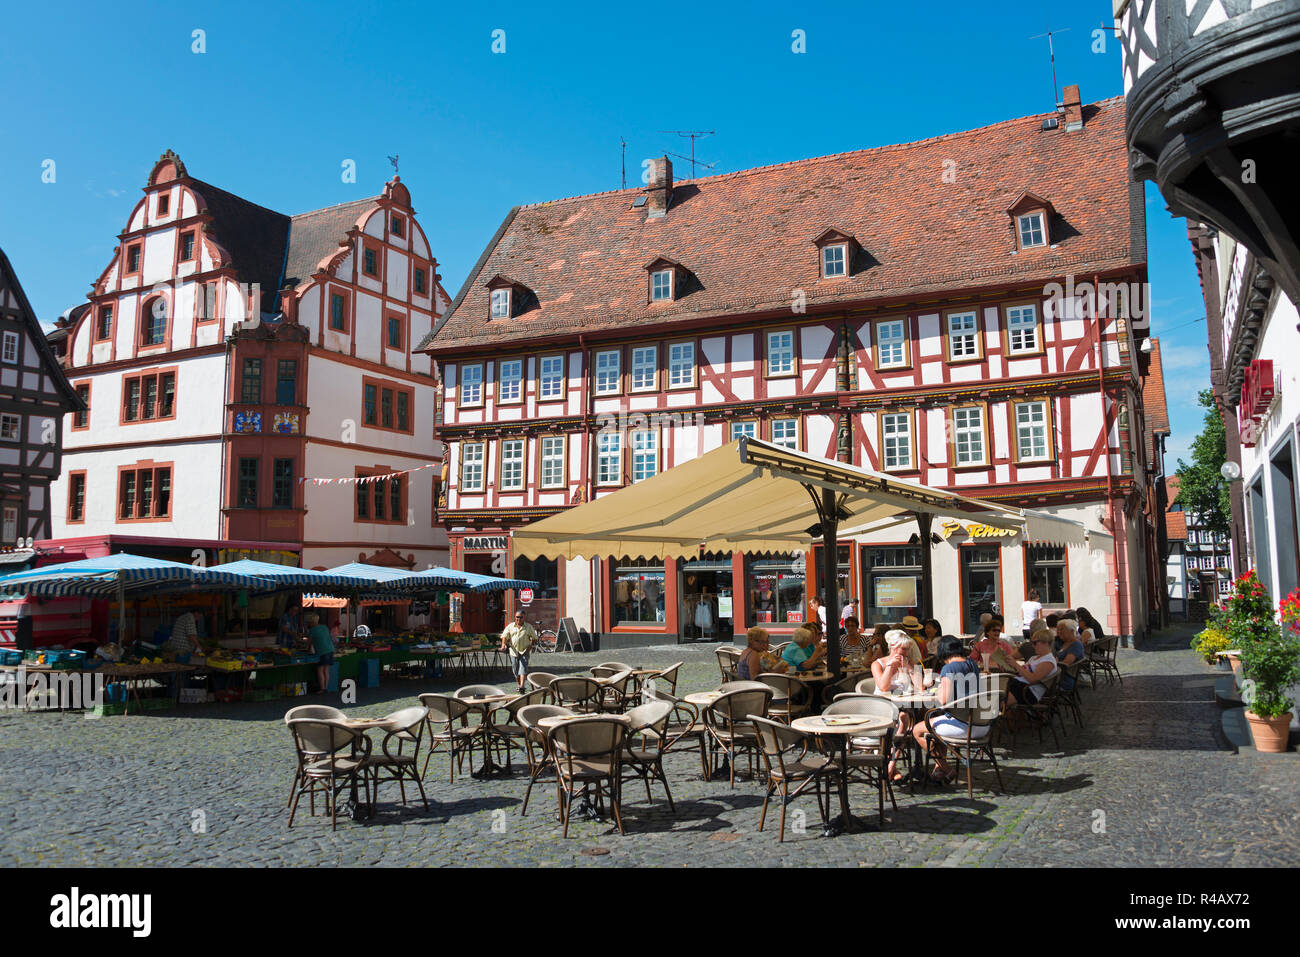 Wedding house and Stumpf house, market place, old town, Alsfeld, Hesse, Germany Stock Photo